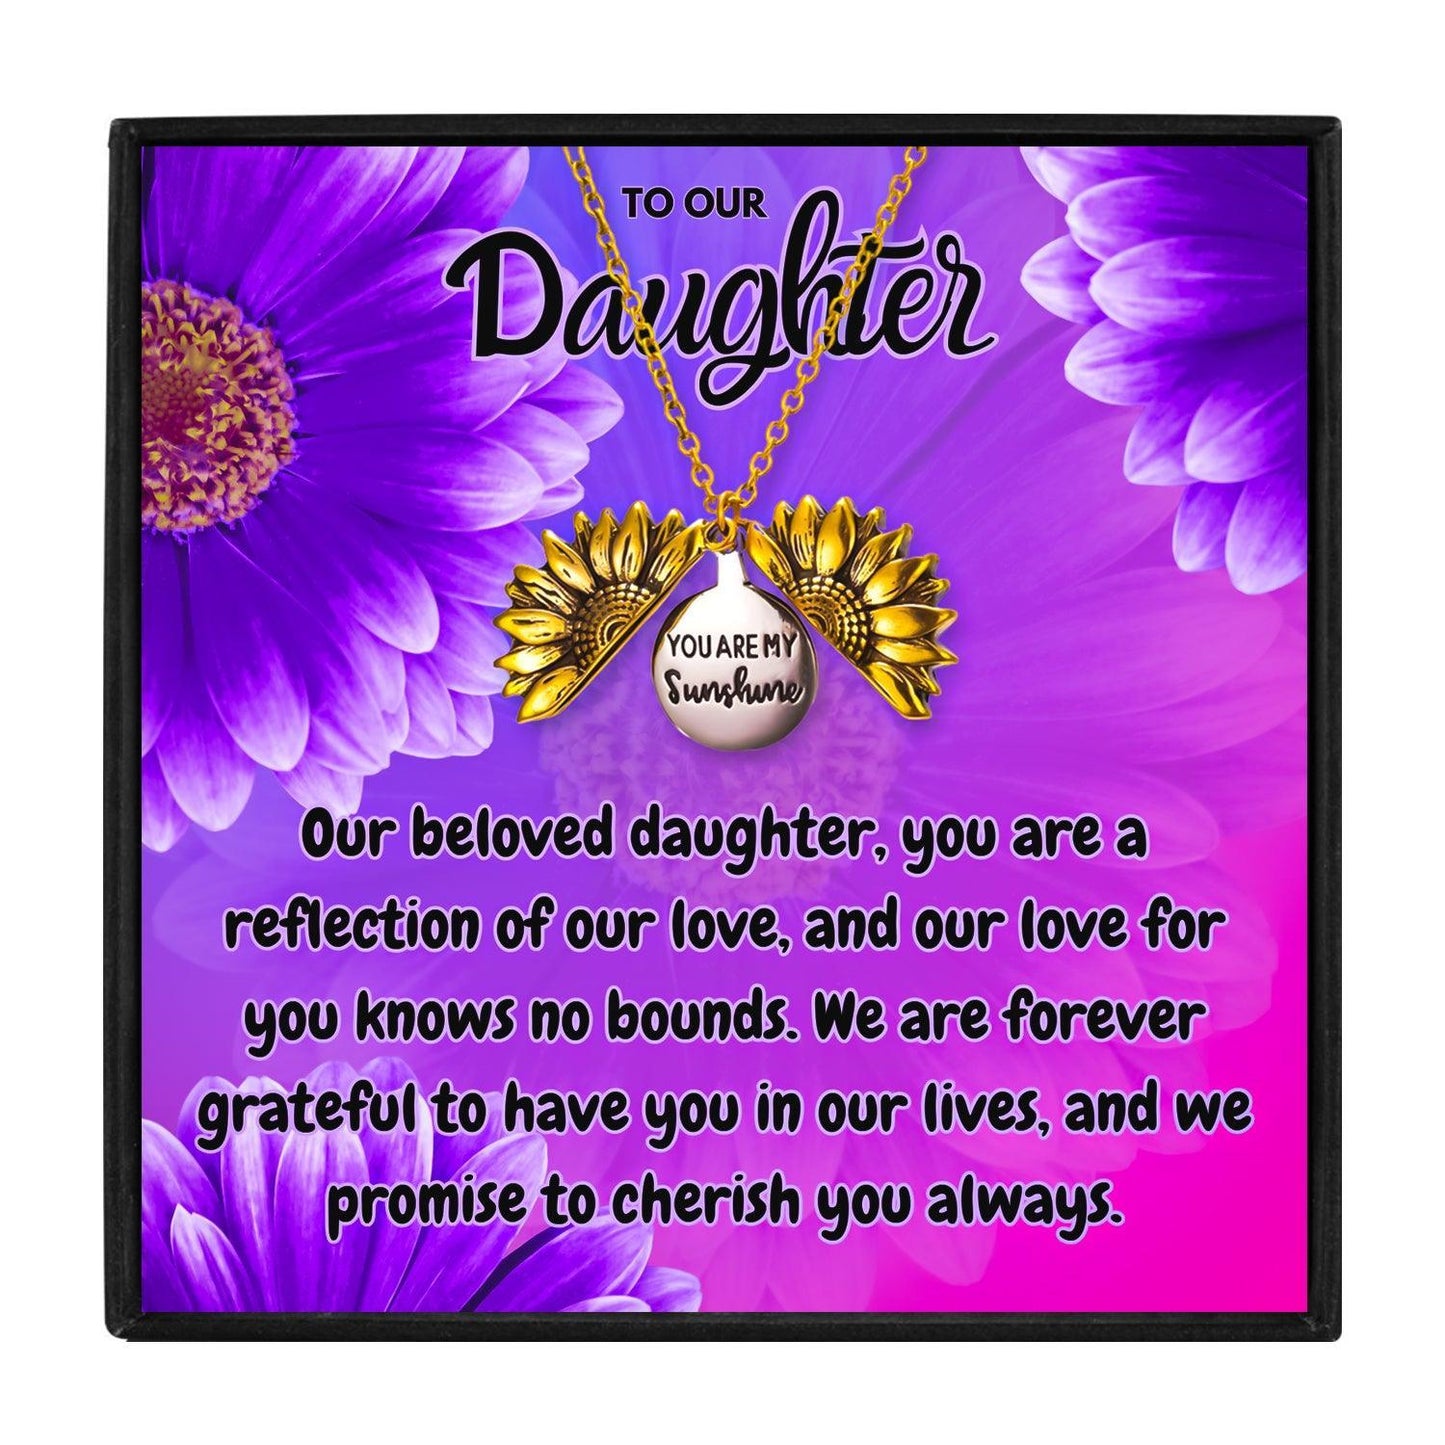 To Our Beautiful Daughter Necklace From Dad & Mom in 2023 | To Our Beautiful Daughter Necklace From Dad & Mom - undefined | daughter gift ideas, Daughter Necklace, Meaningful Daughter Necklaces, Mother Daughter Necklace, To my daughter necklace, To my daughter necklace from mom | From Hunny Life | hunnylife.com